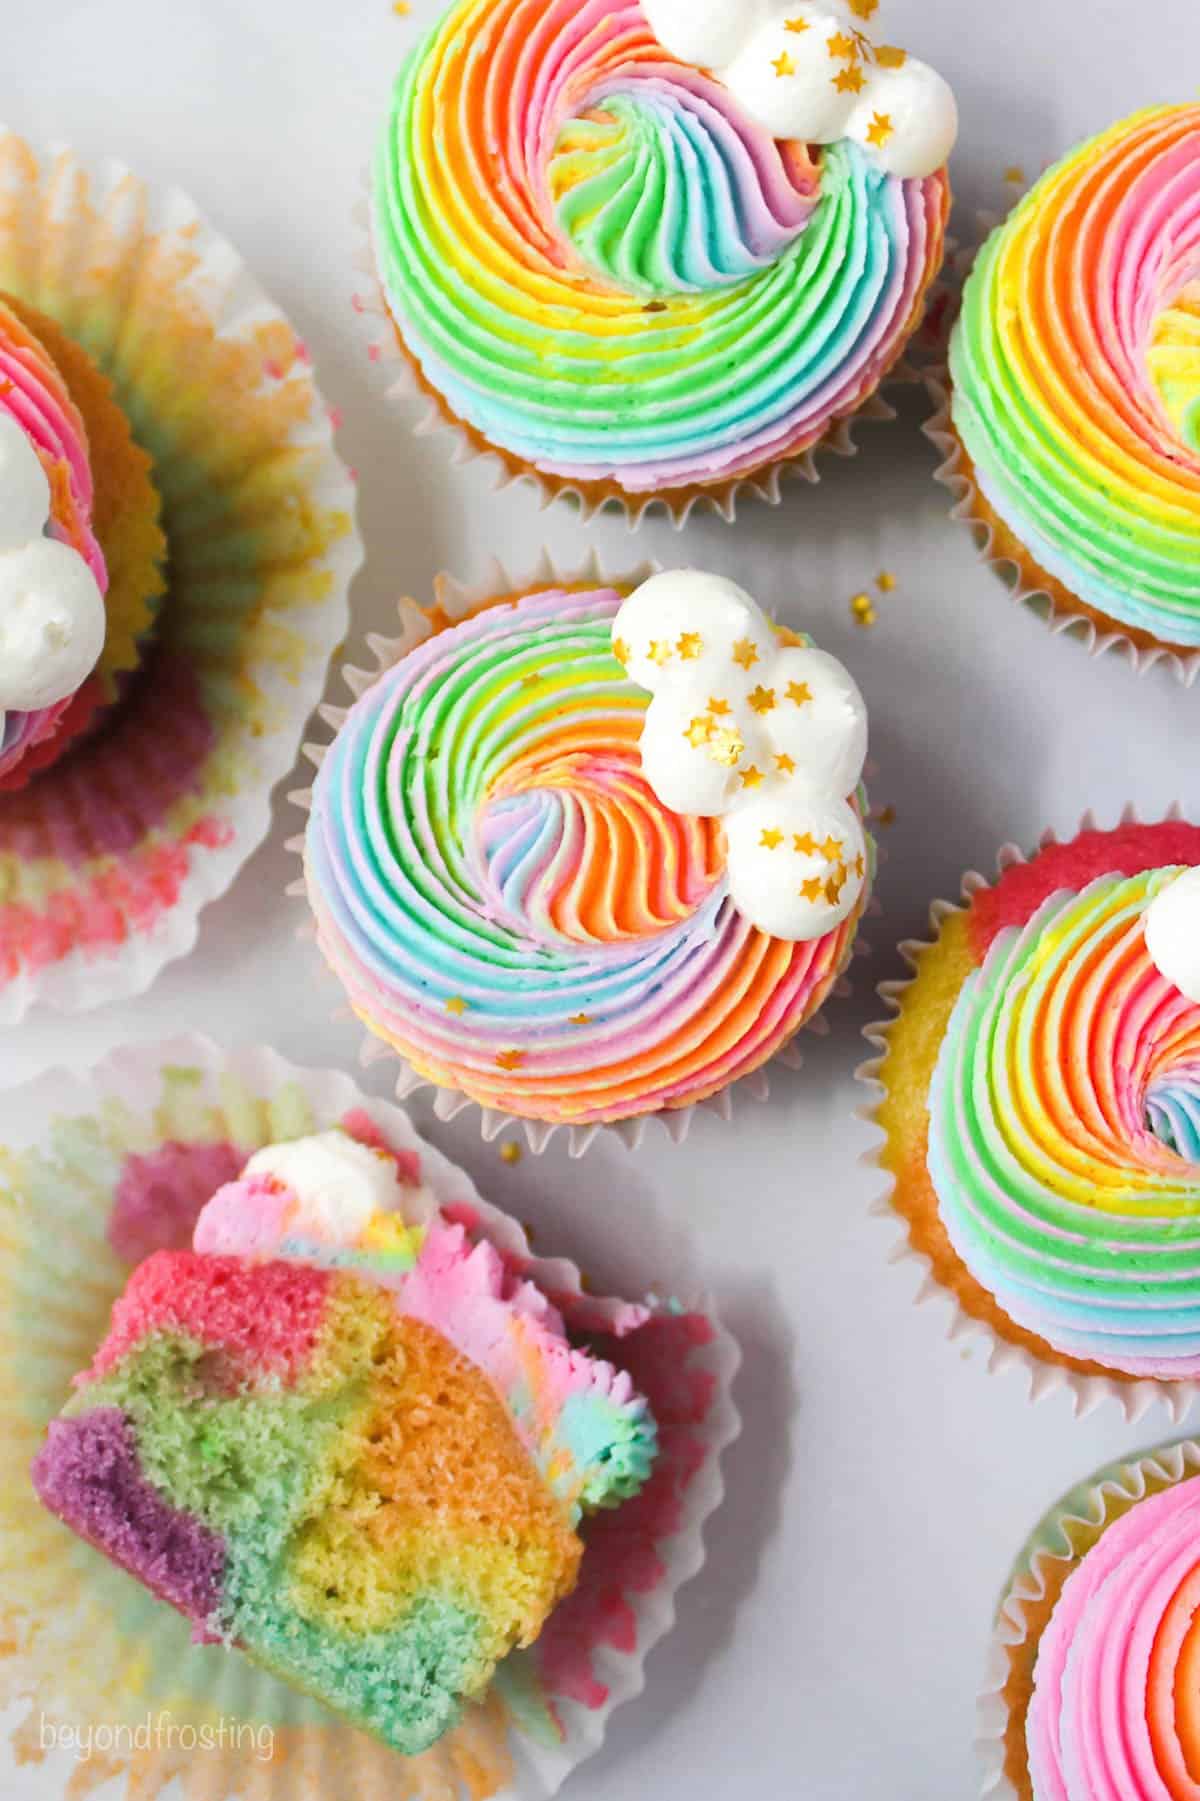 Overhead view of rainbow cupcakes with rainbow frosting